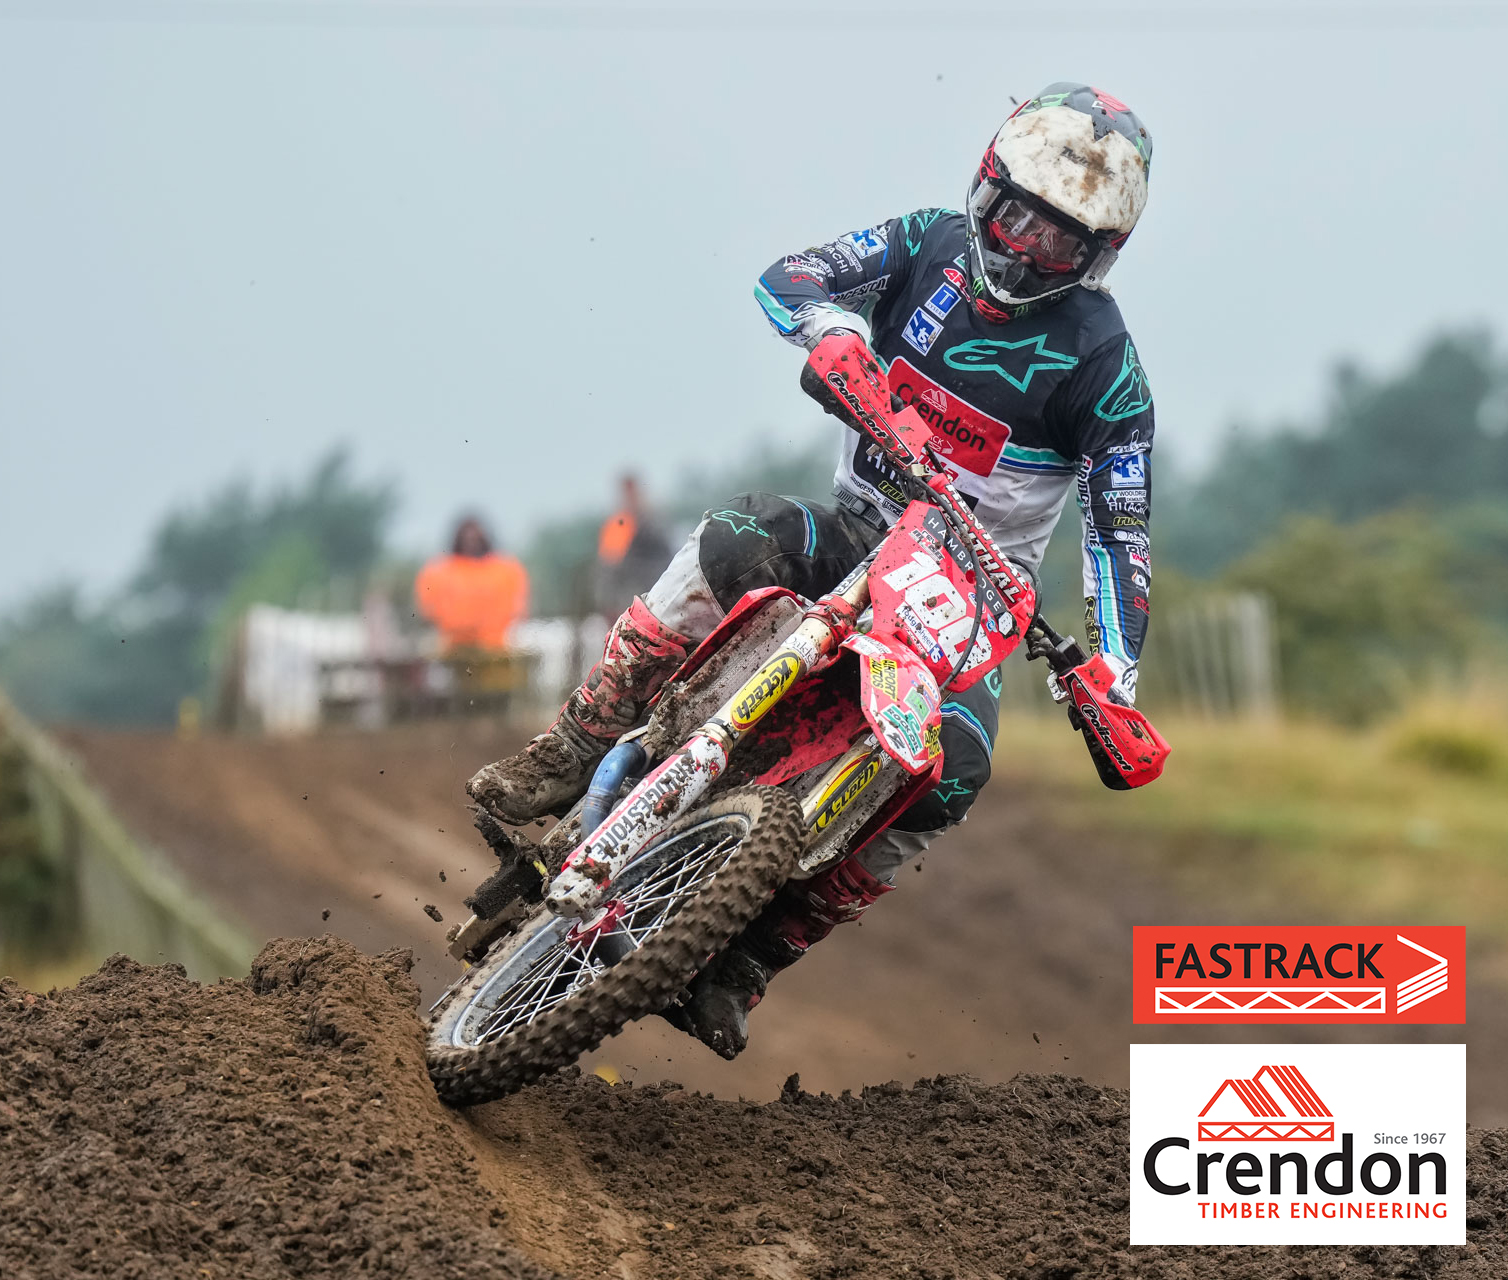 Another Win for Crendon FASTRACK Honda MX1!